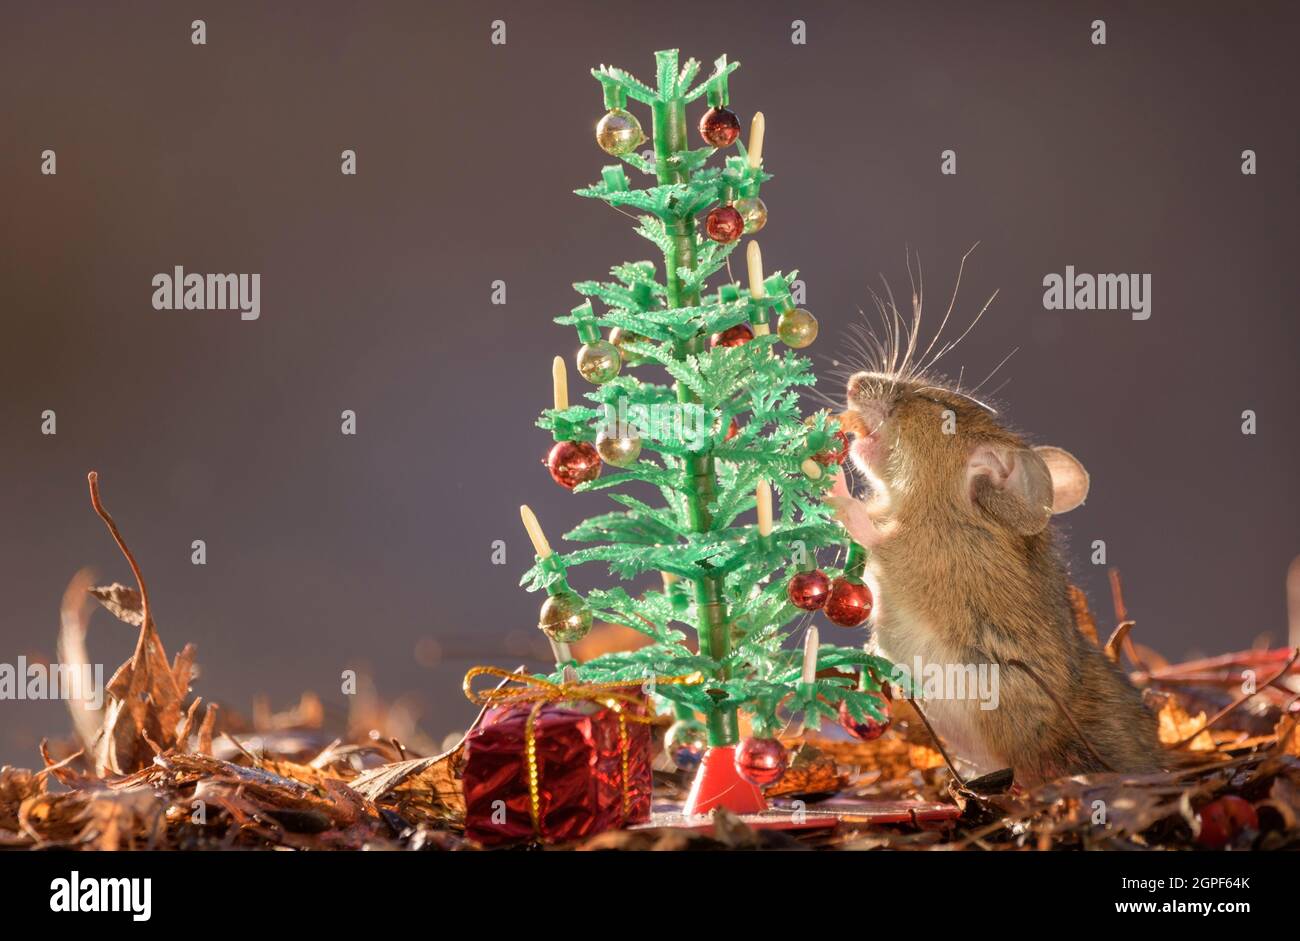 Mouse is climbing in a Christmas tree Stock Photo